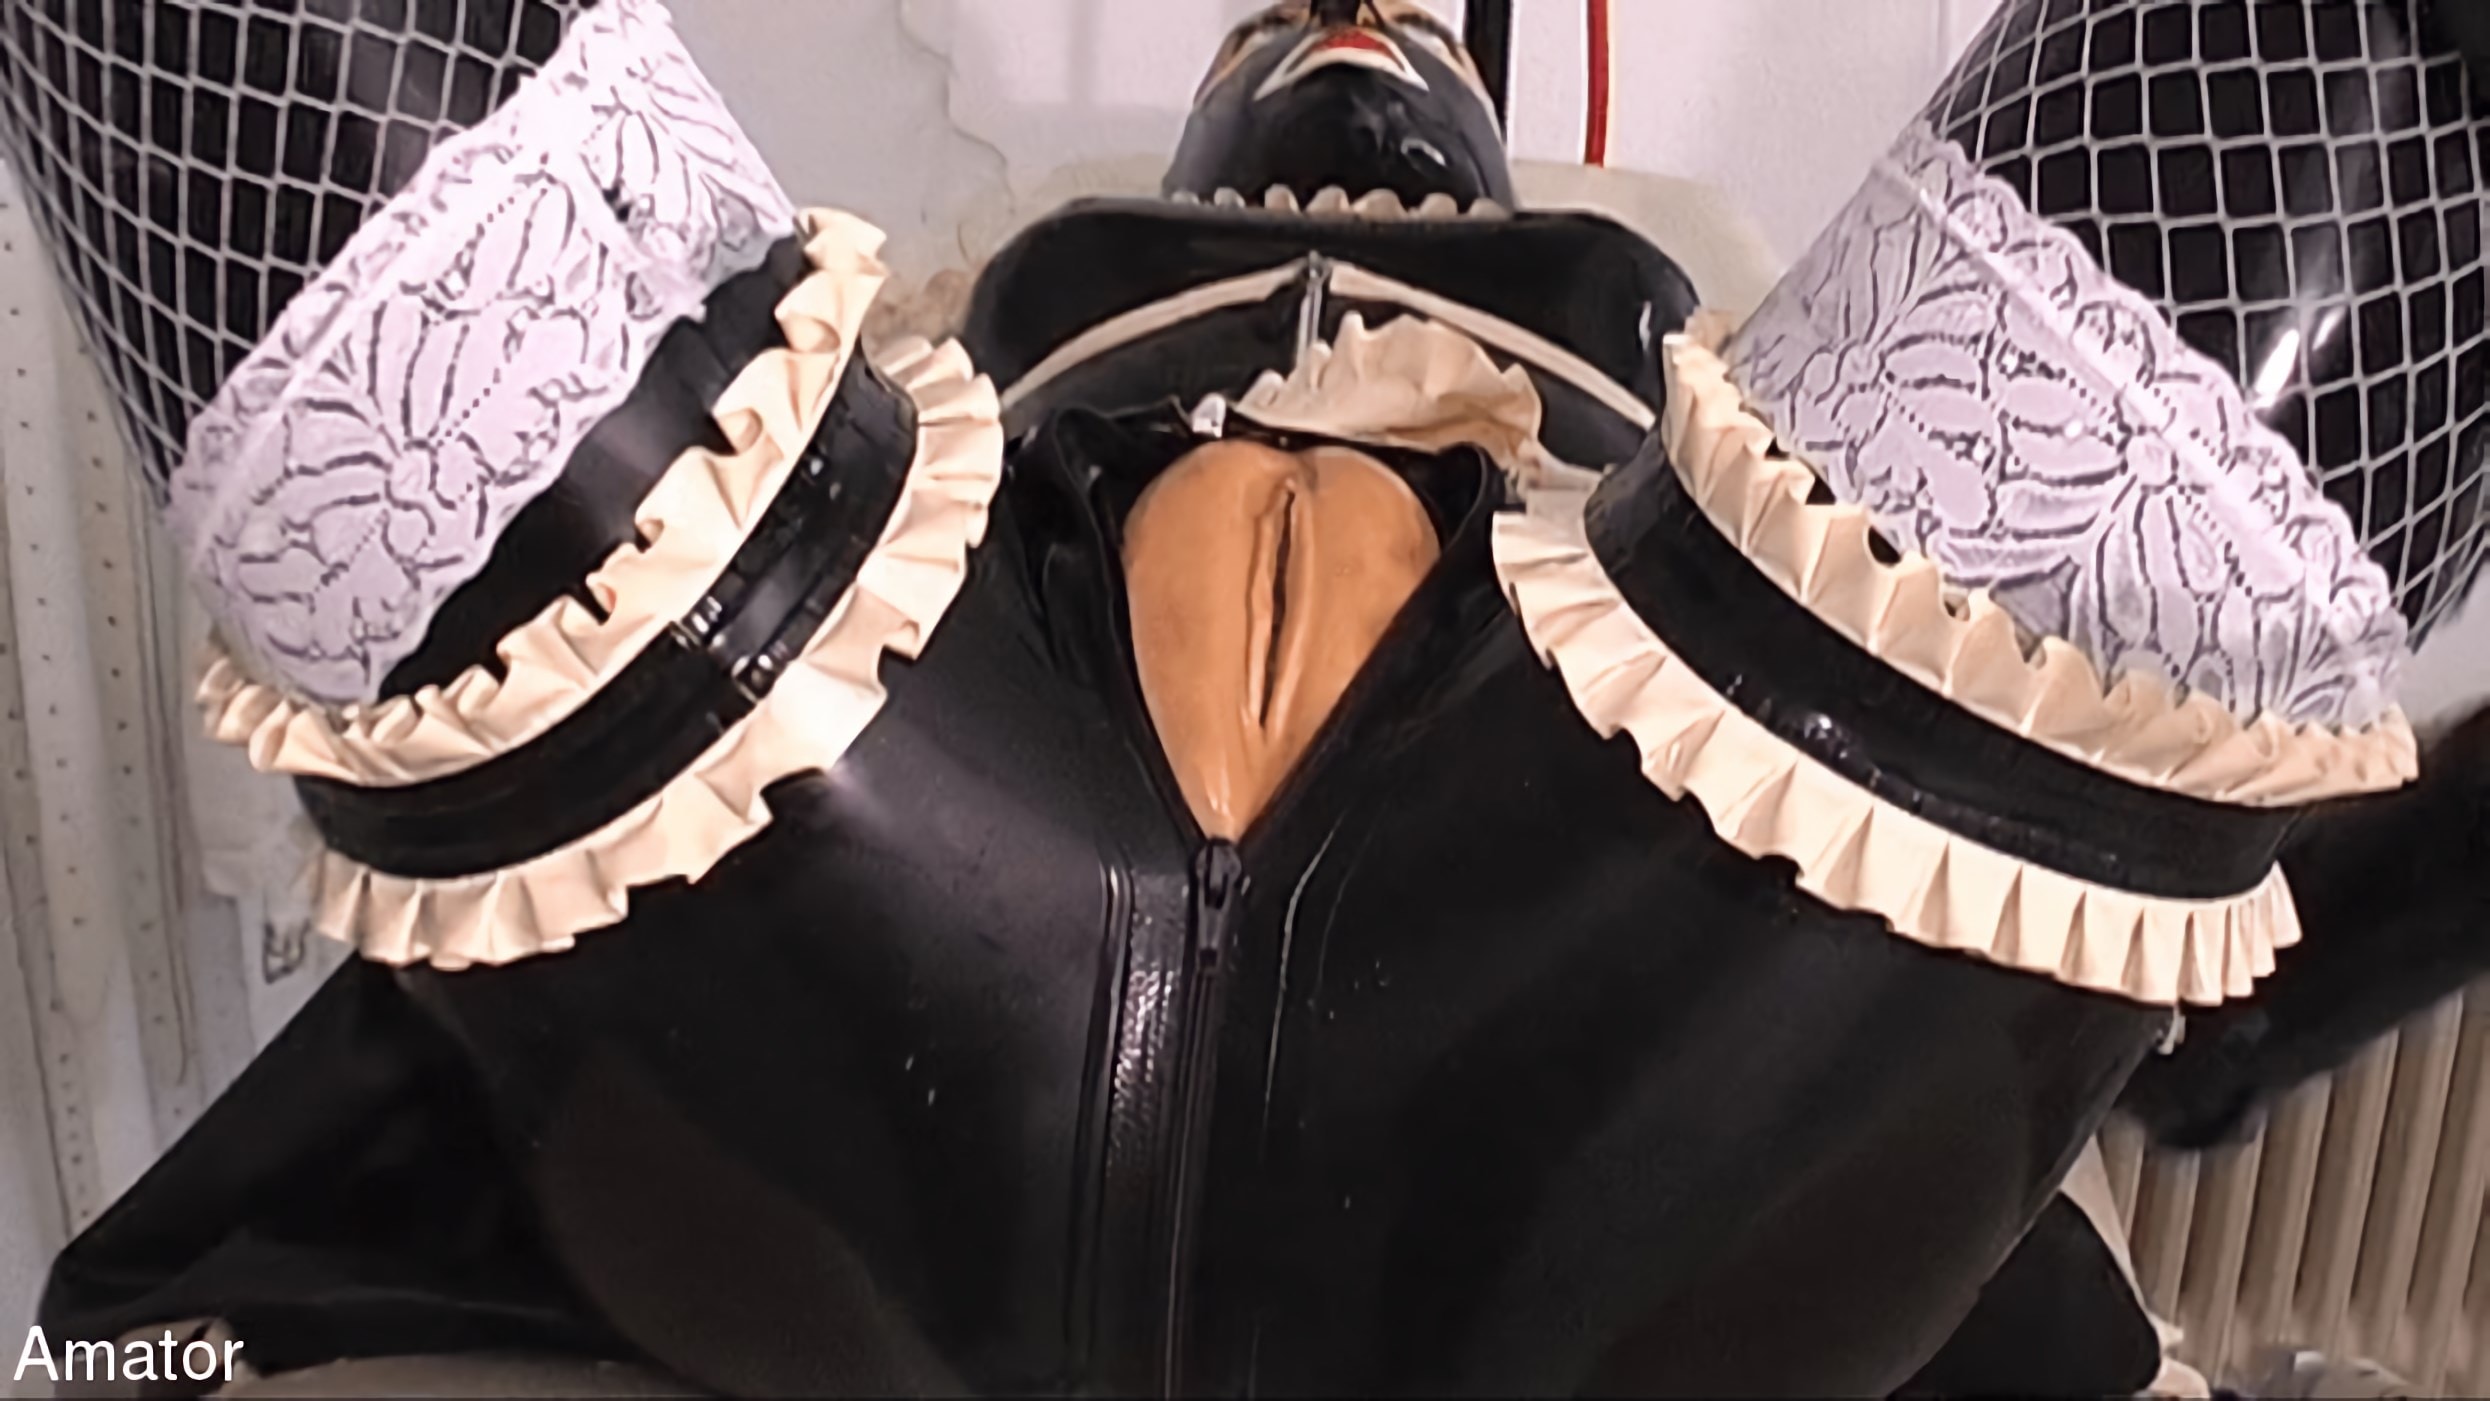 Kink Partners 'The rubber maid in the clinic part 1' starring Sklave (Photo 2)